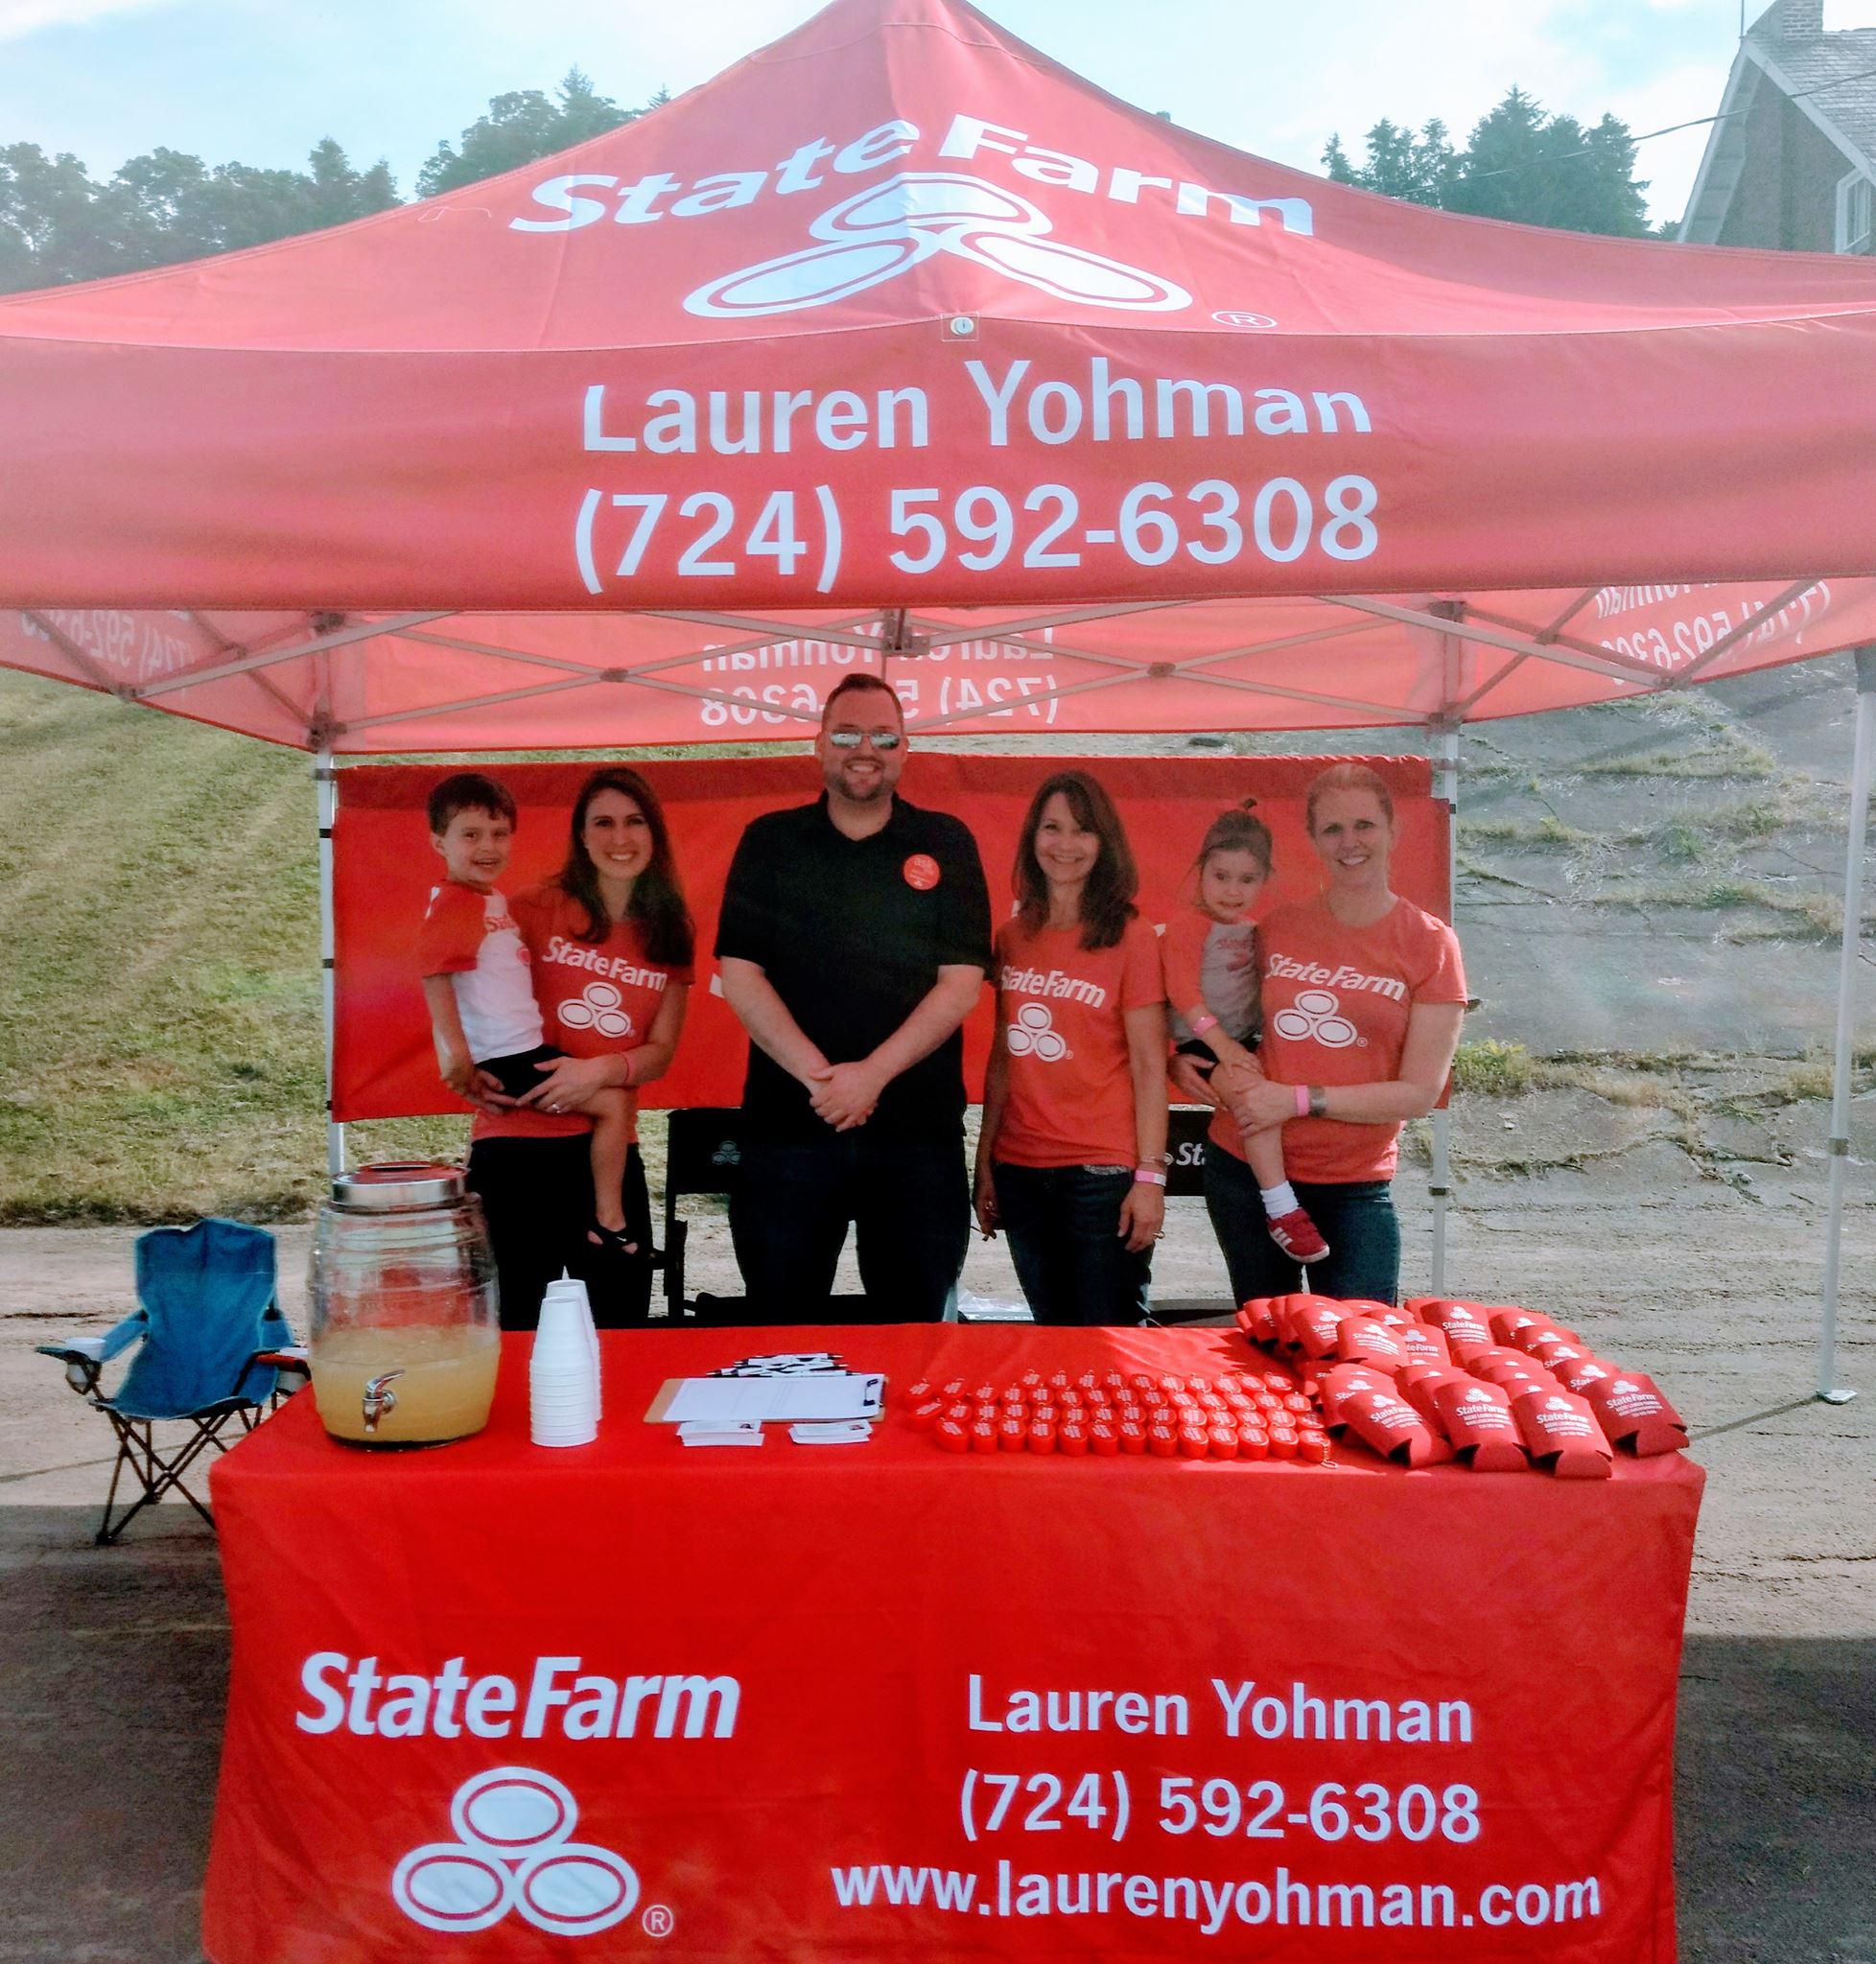 Stop by our booth to get a free quote from us! Lauren Yohman - State Farm Insurance Agent Uniontown (724)592-6308